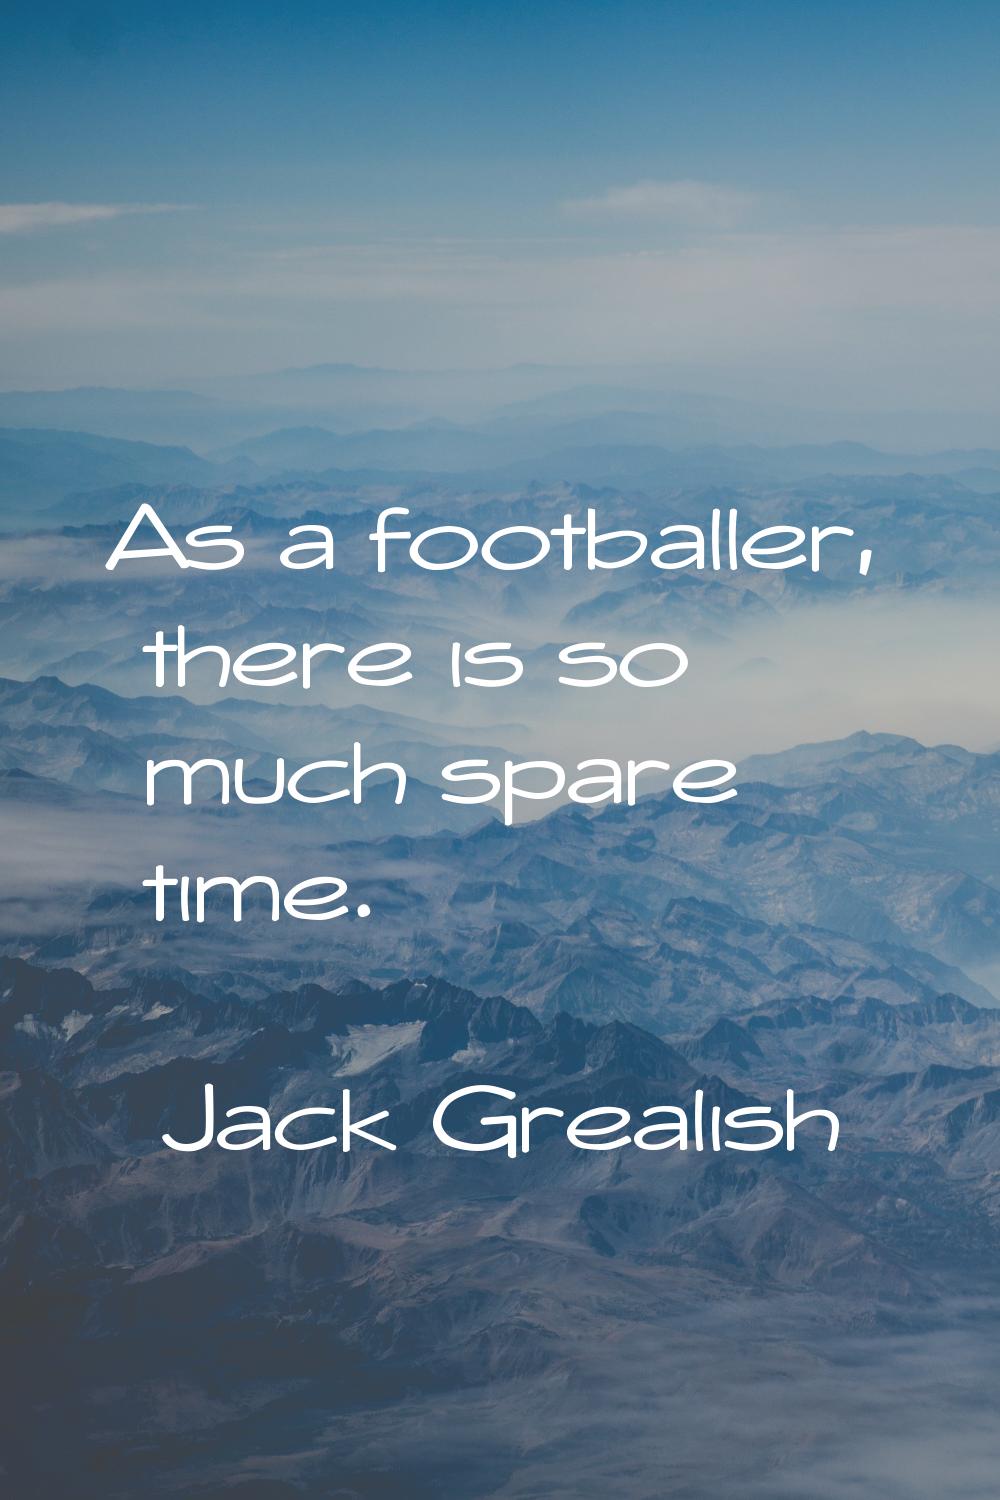 As a footballer, there is so much spare time.